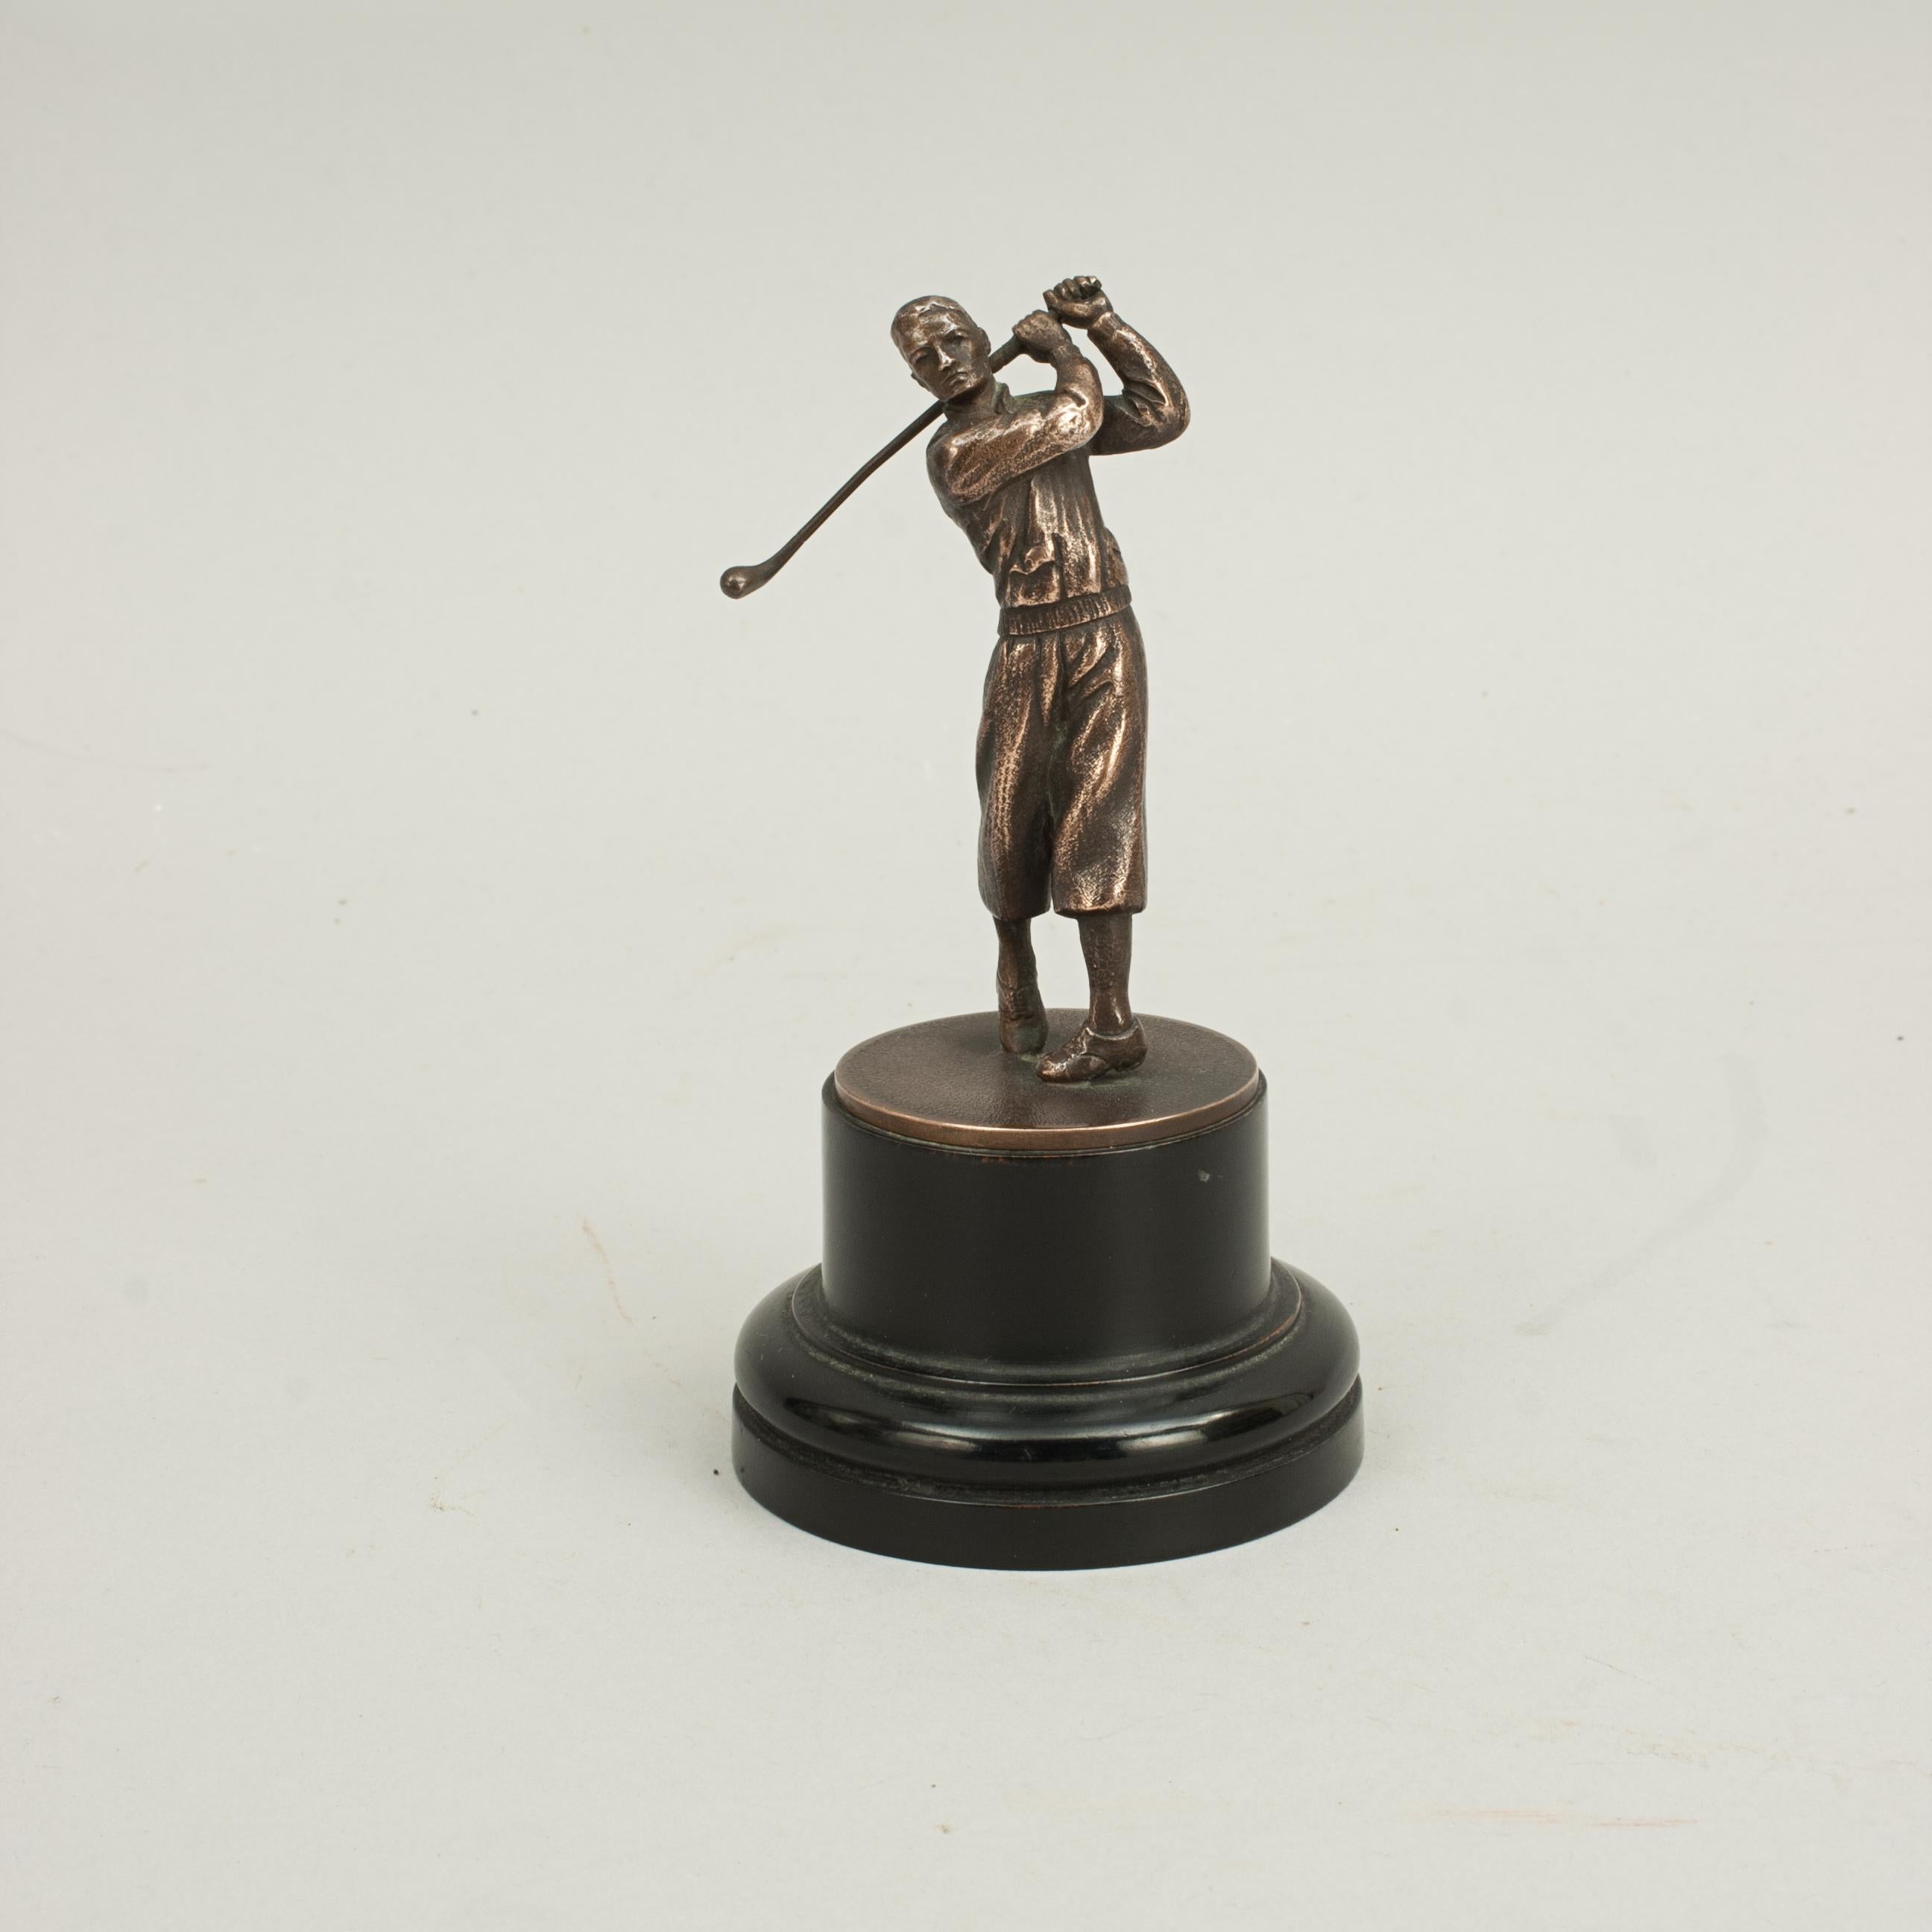 Metal Golf Figure on stand.
A nice simple golf figure on an ebonized round base. The figure in full follow through position. Would make a lovely trophy.
Figure stands 7 ½ cm high.

Dimensions:

Height
11.5 cm / 4 